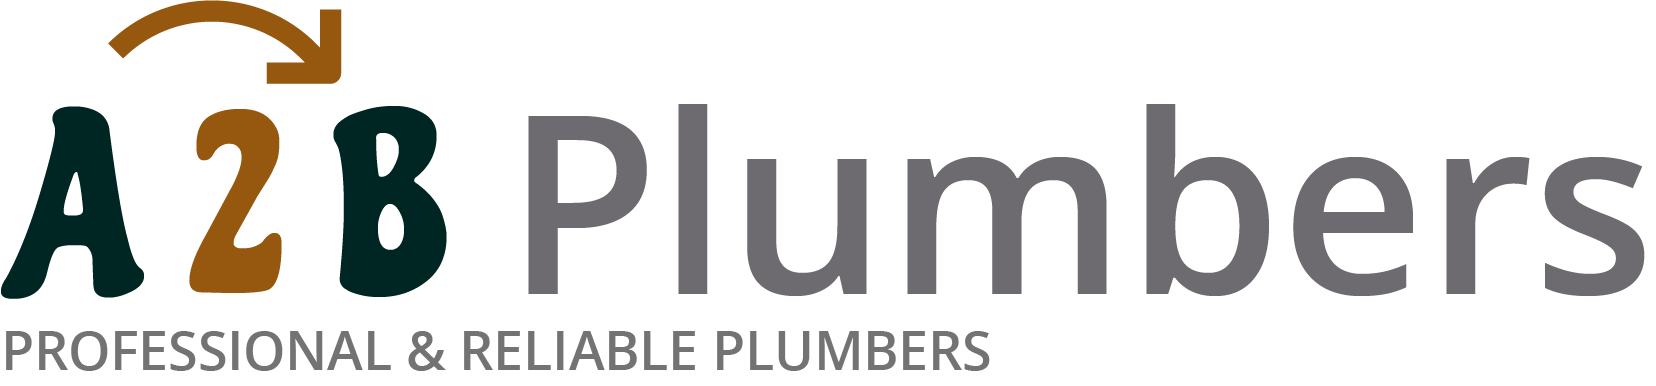 If you need a boiler installed, a radiator repaired or a leaking tap fixed, call us now - we provide services for properties in Pendlebury and the local area.